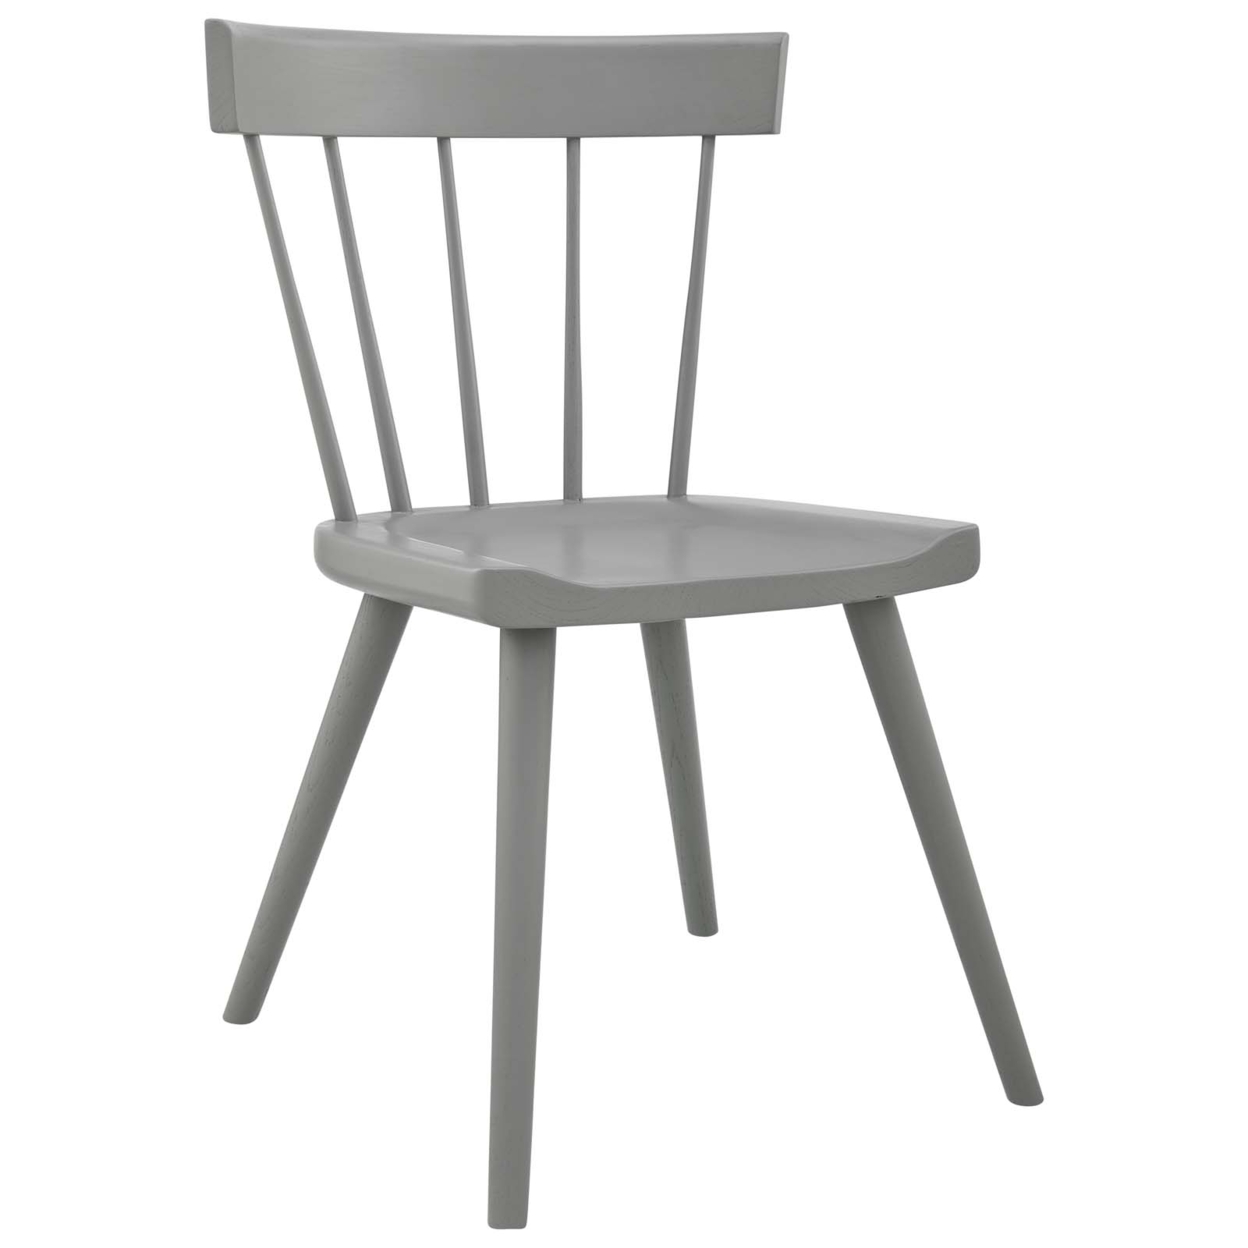 Sutter Wood Dining Side Chair, Light Gray